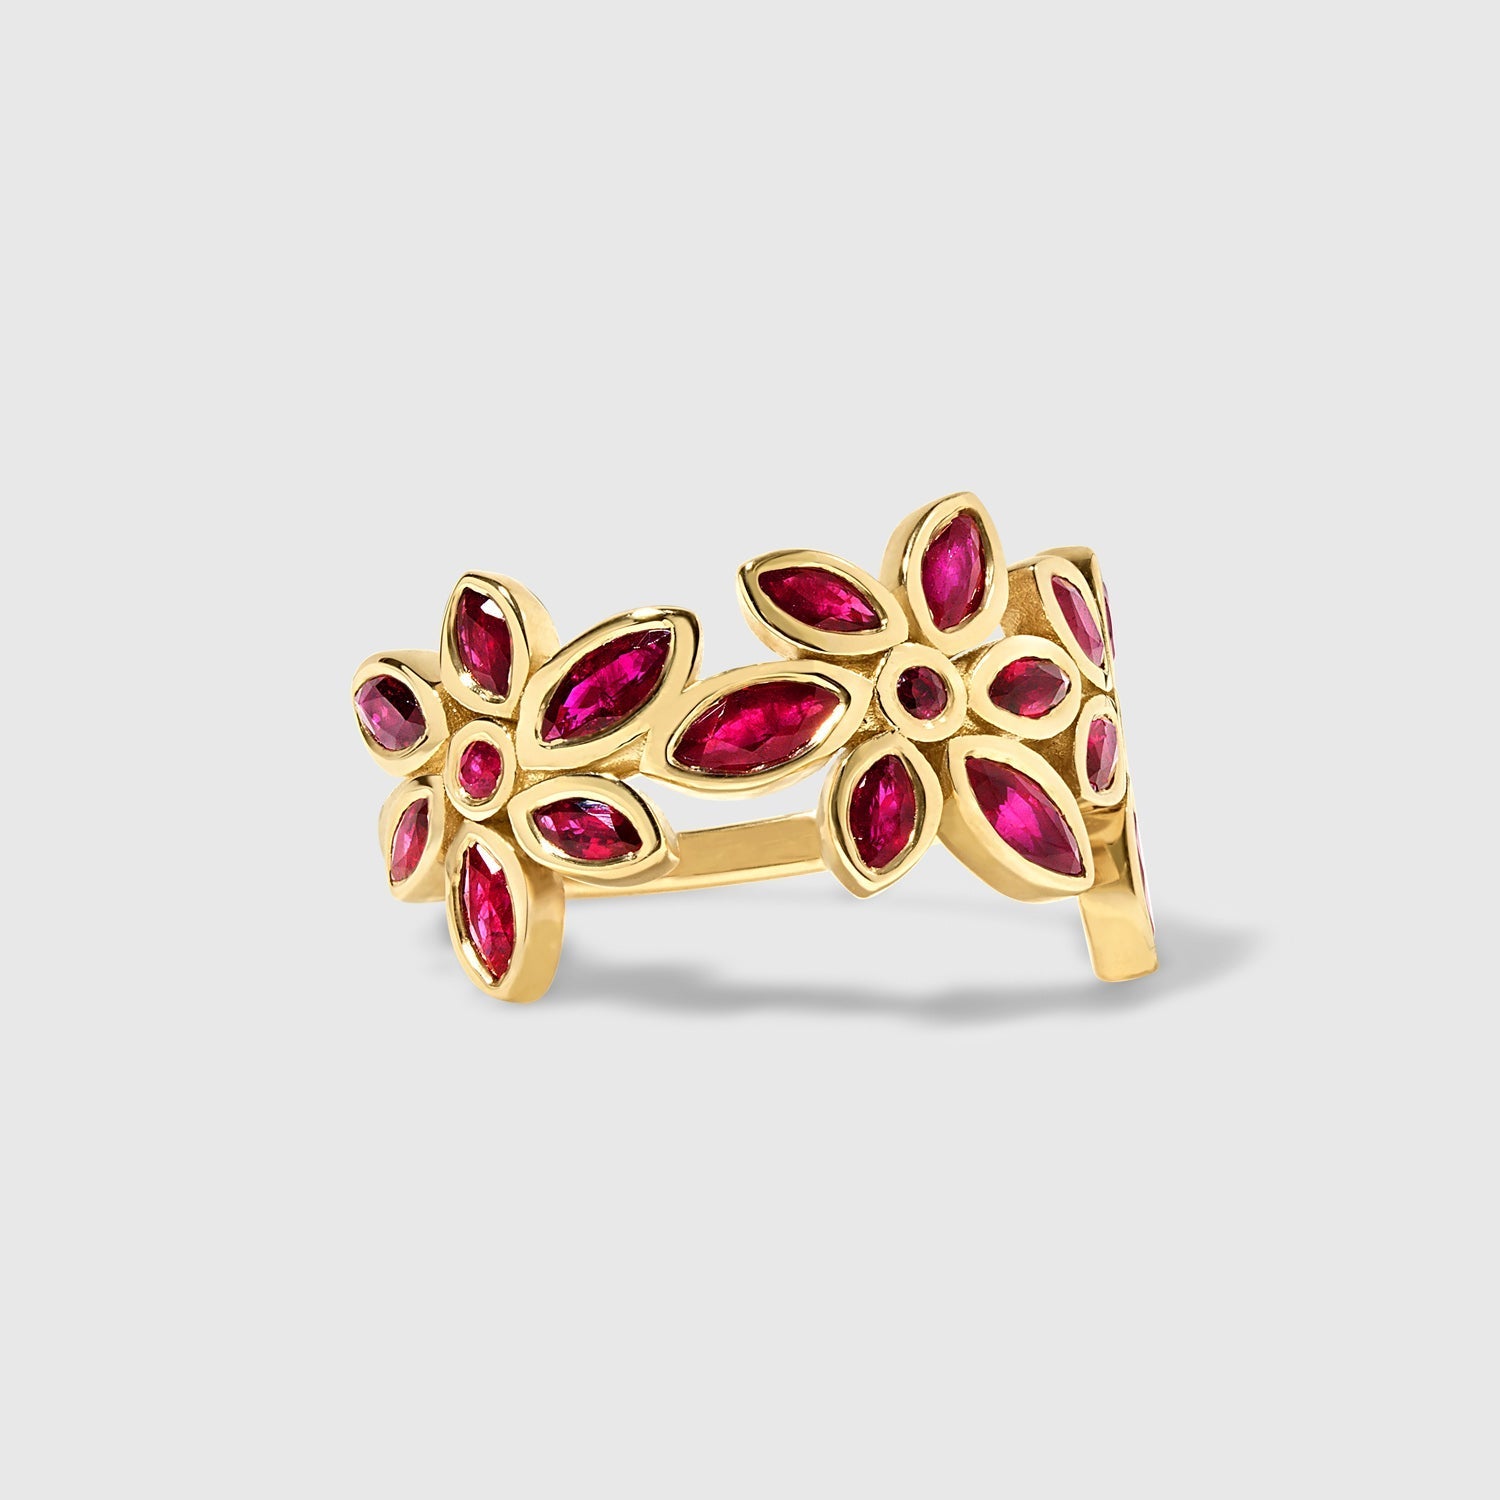 Maria’s - Three Flowers Ruby Ring – La Fleur Rouge Collection of Rubies & Solid Gold - Aurora Laffite Jewelry